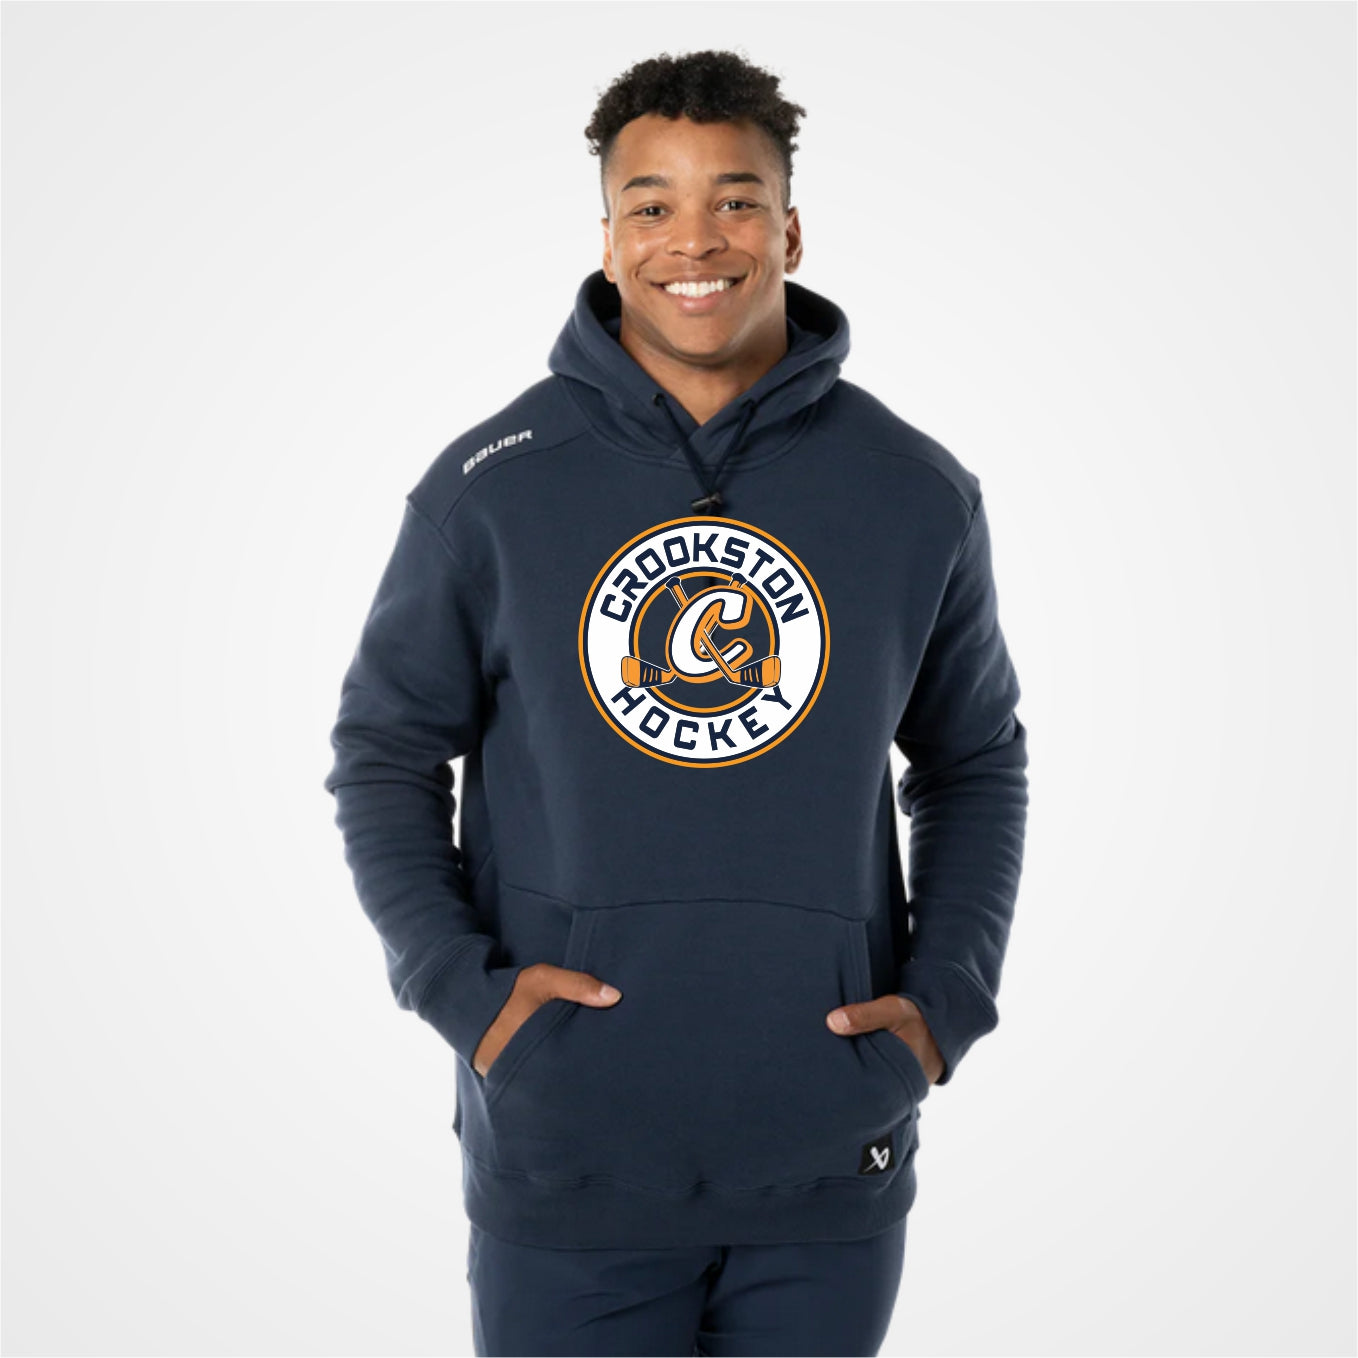 Crookston Youth Hockey - Bauer Ultimate Team Hoodie- Youth/Adult